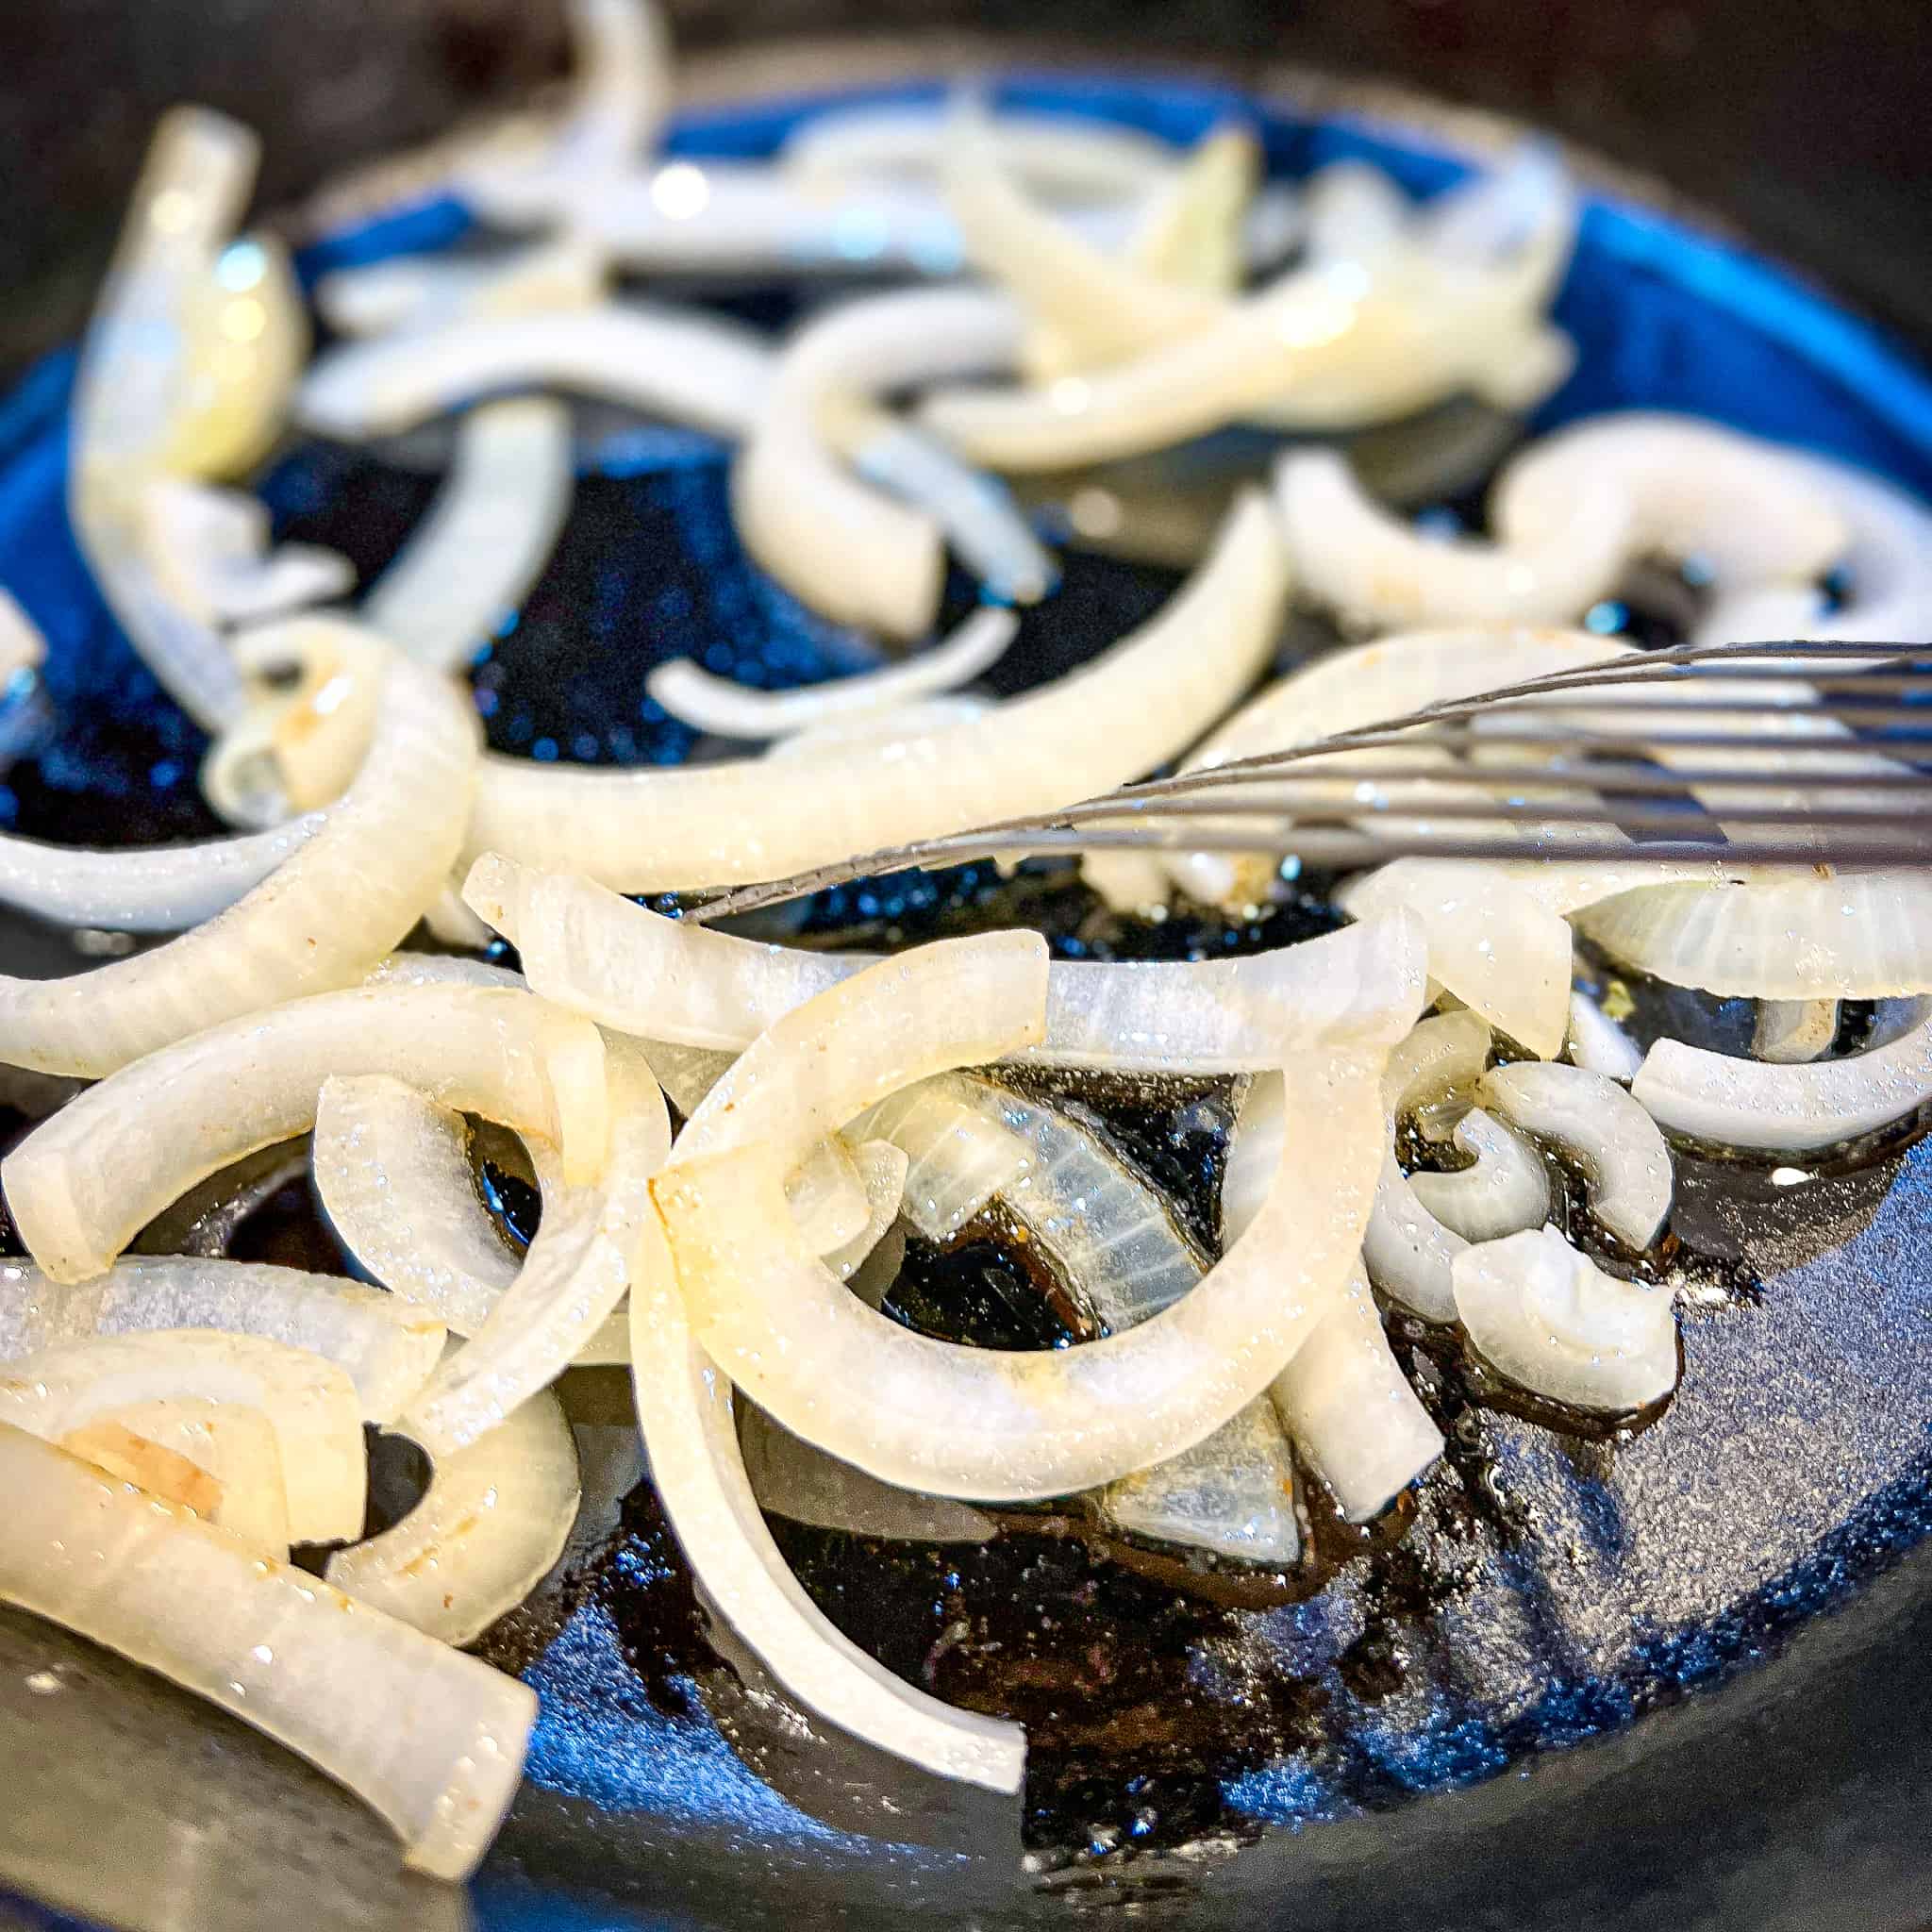 Sauteing onions in a cast iron pan.